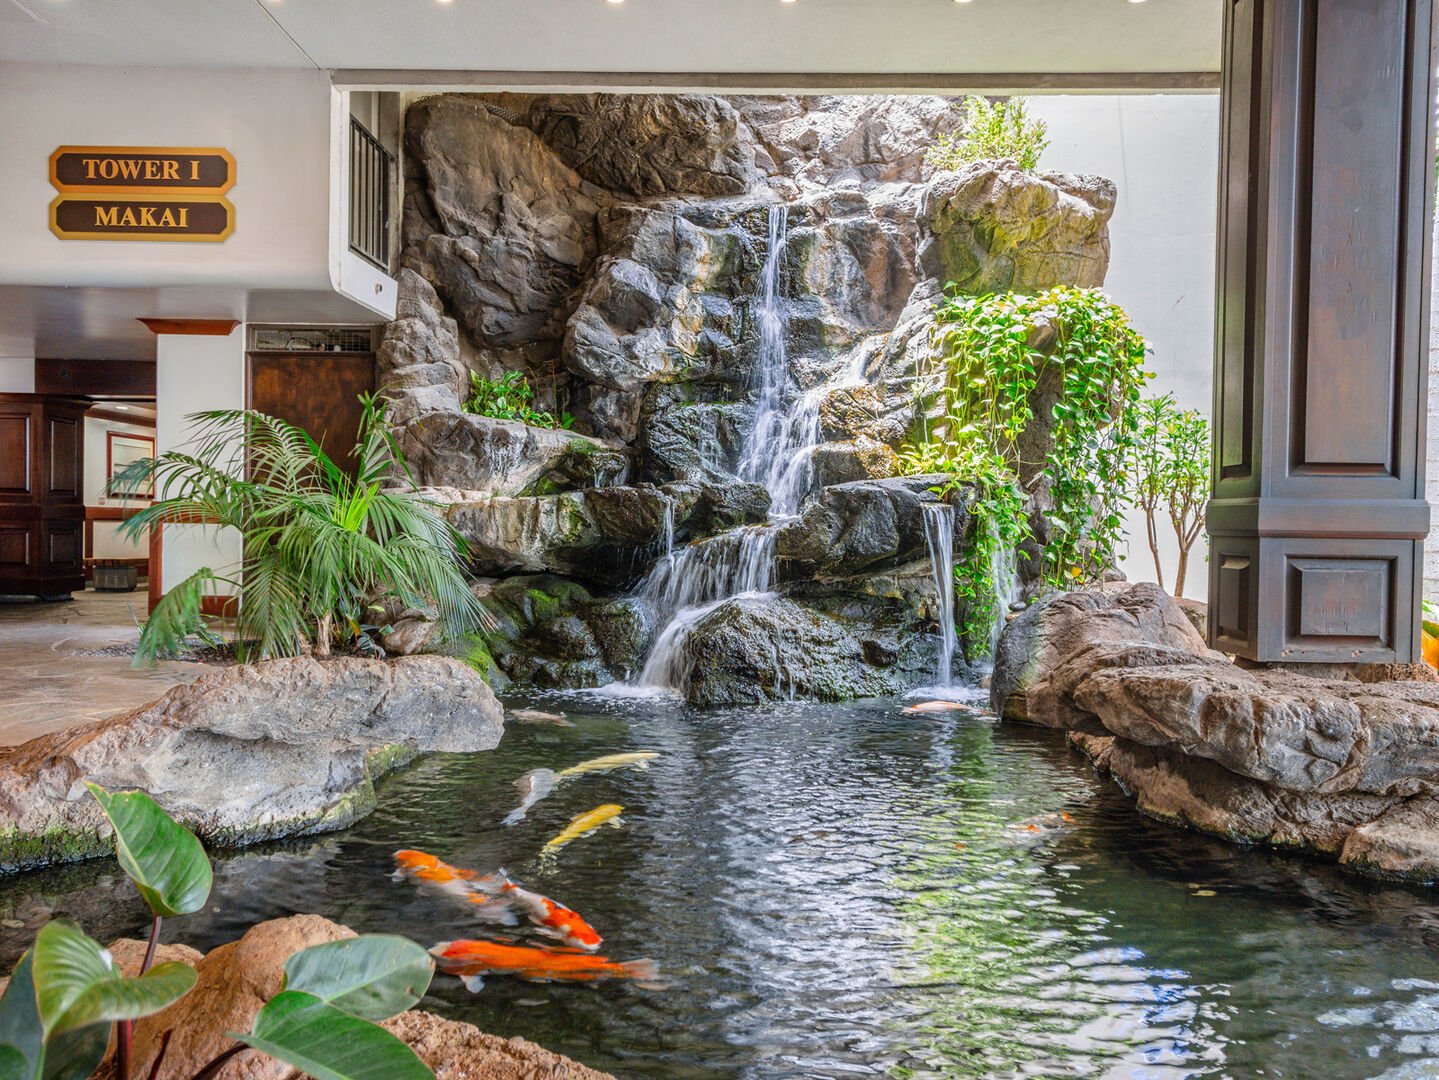 Koi pond in the lobby area